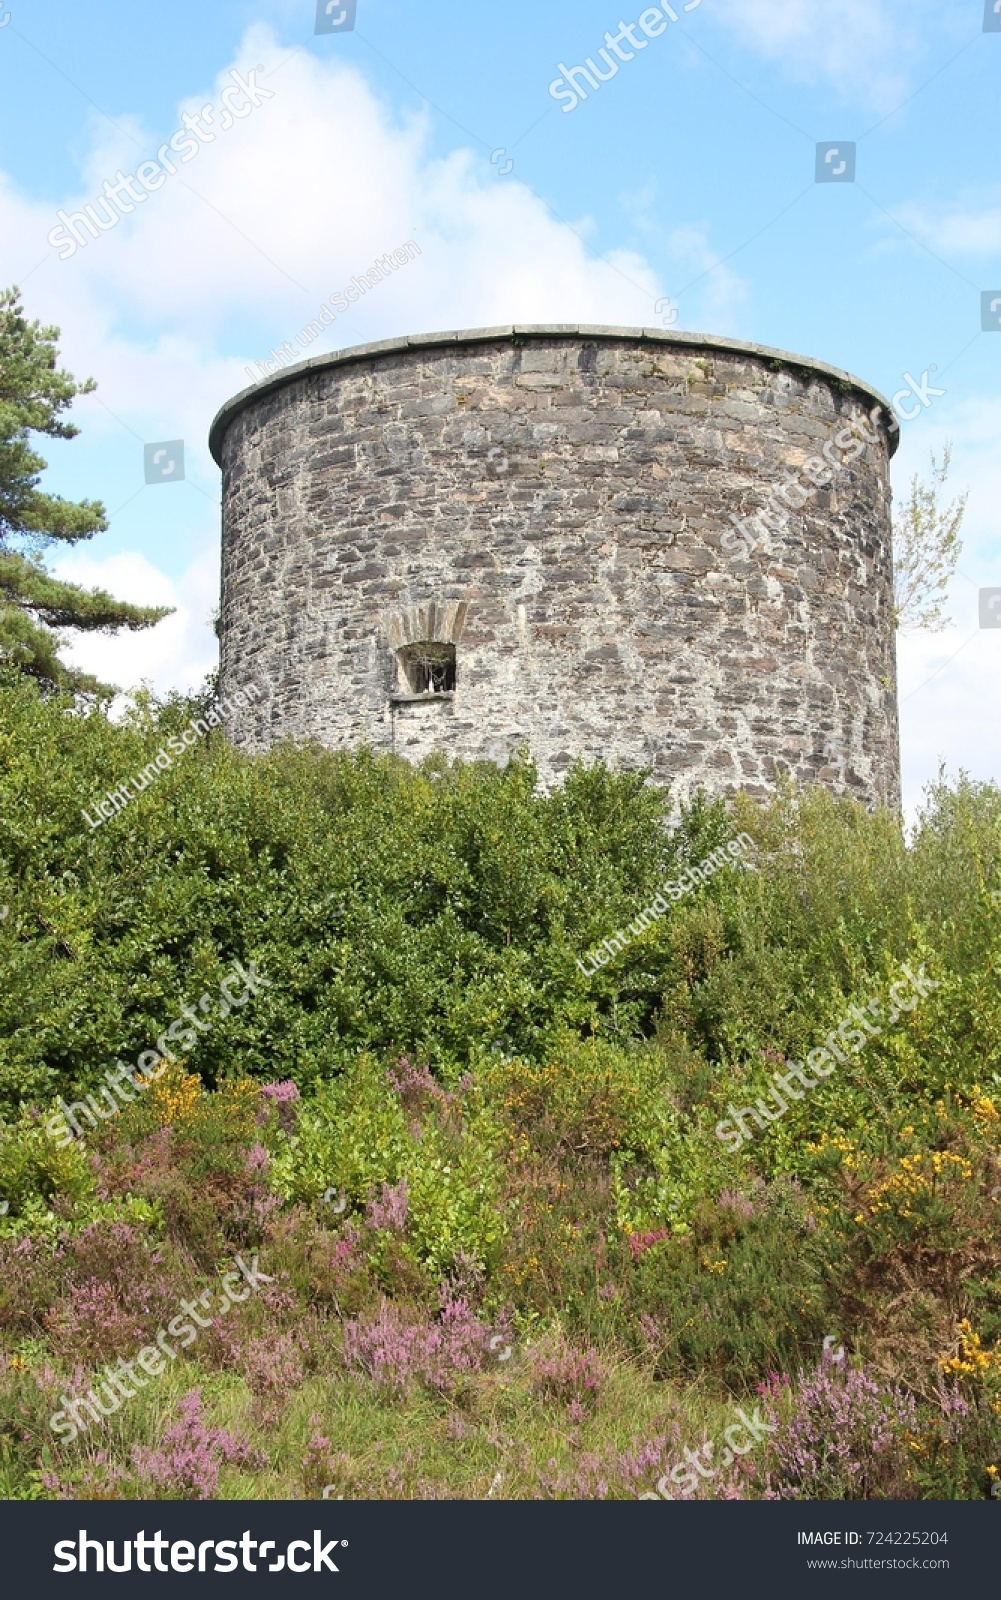 Old stone tower with barred window, Ireland. #724225204